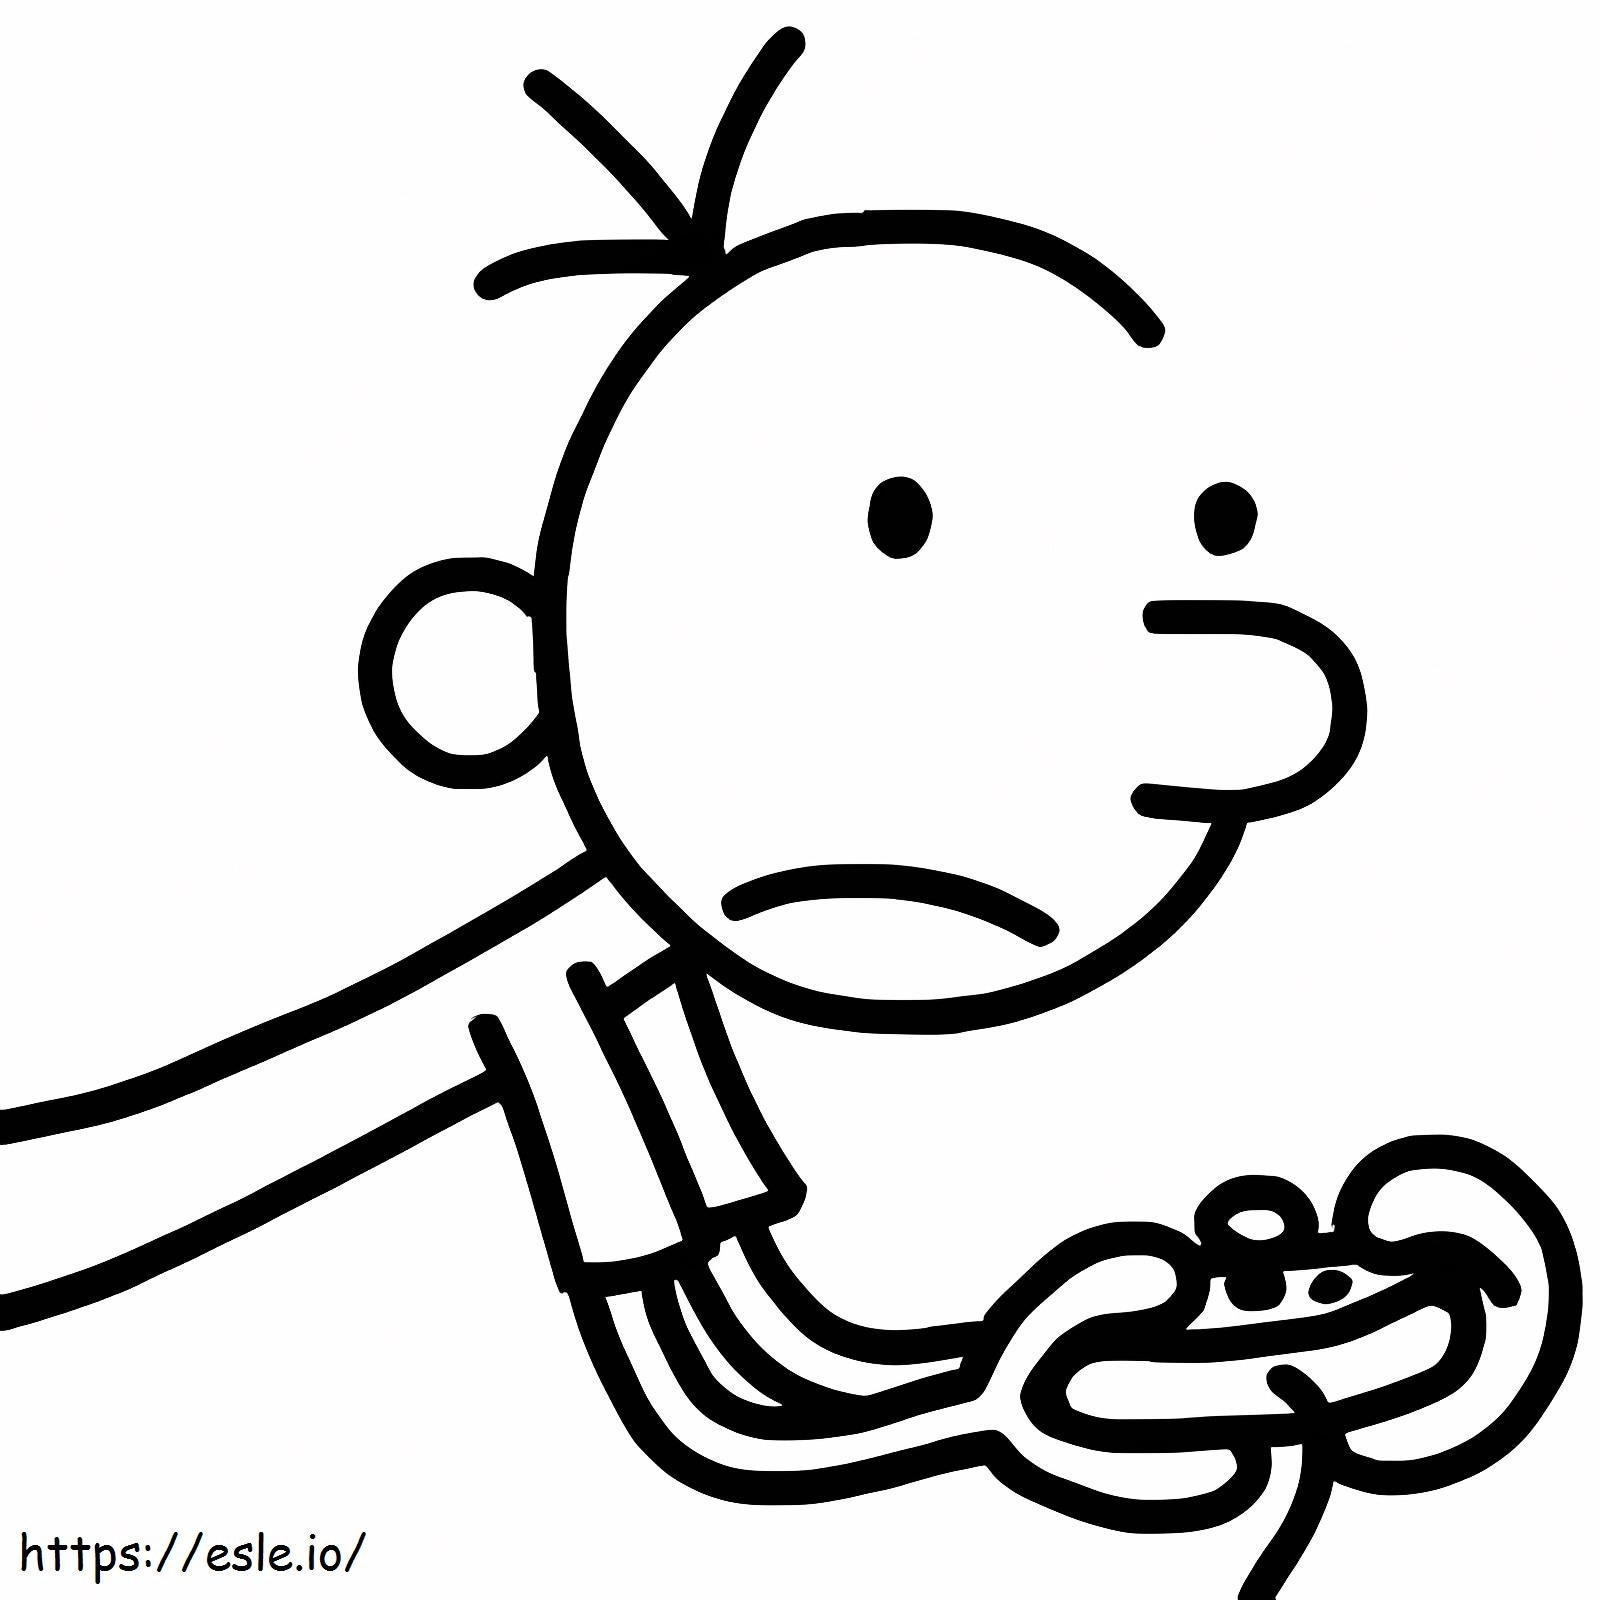 Weak Child Play Video Game coloring page